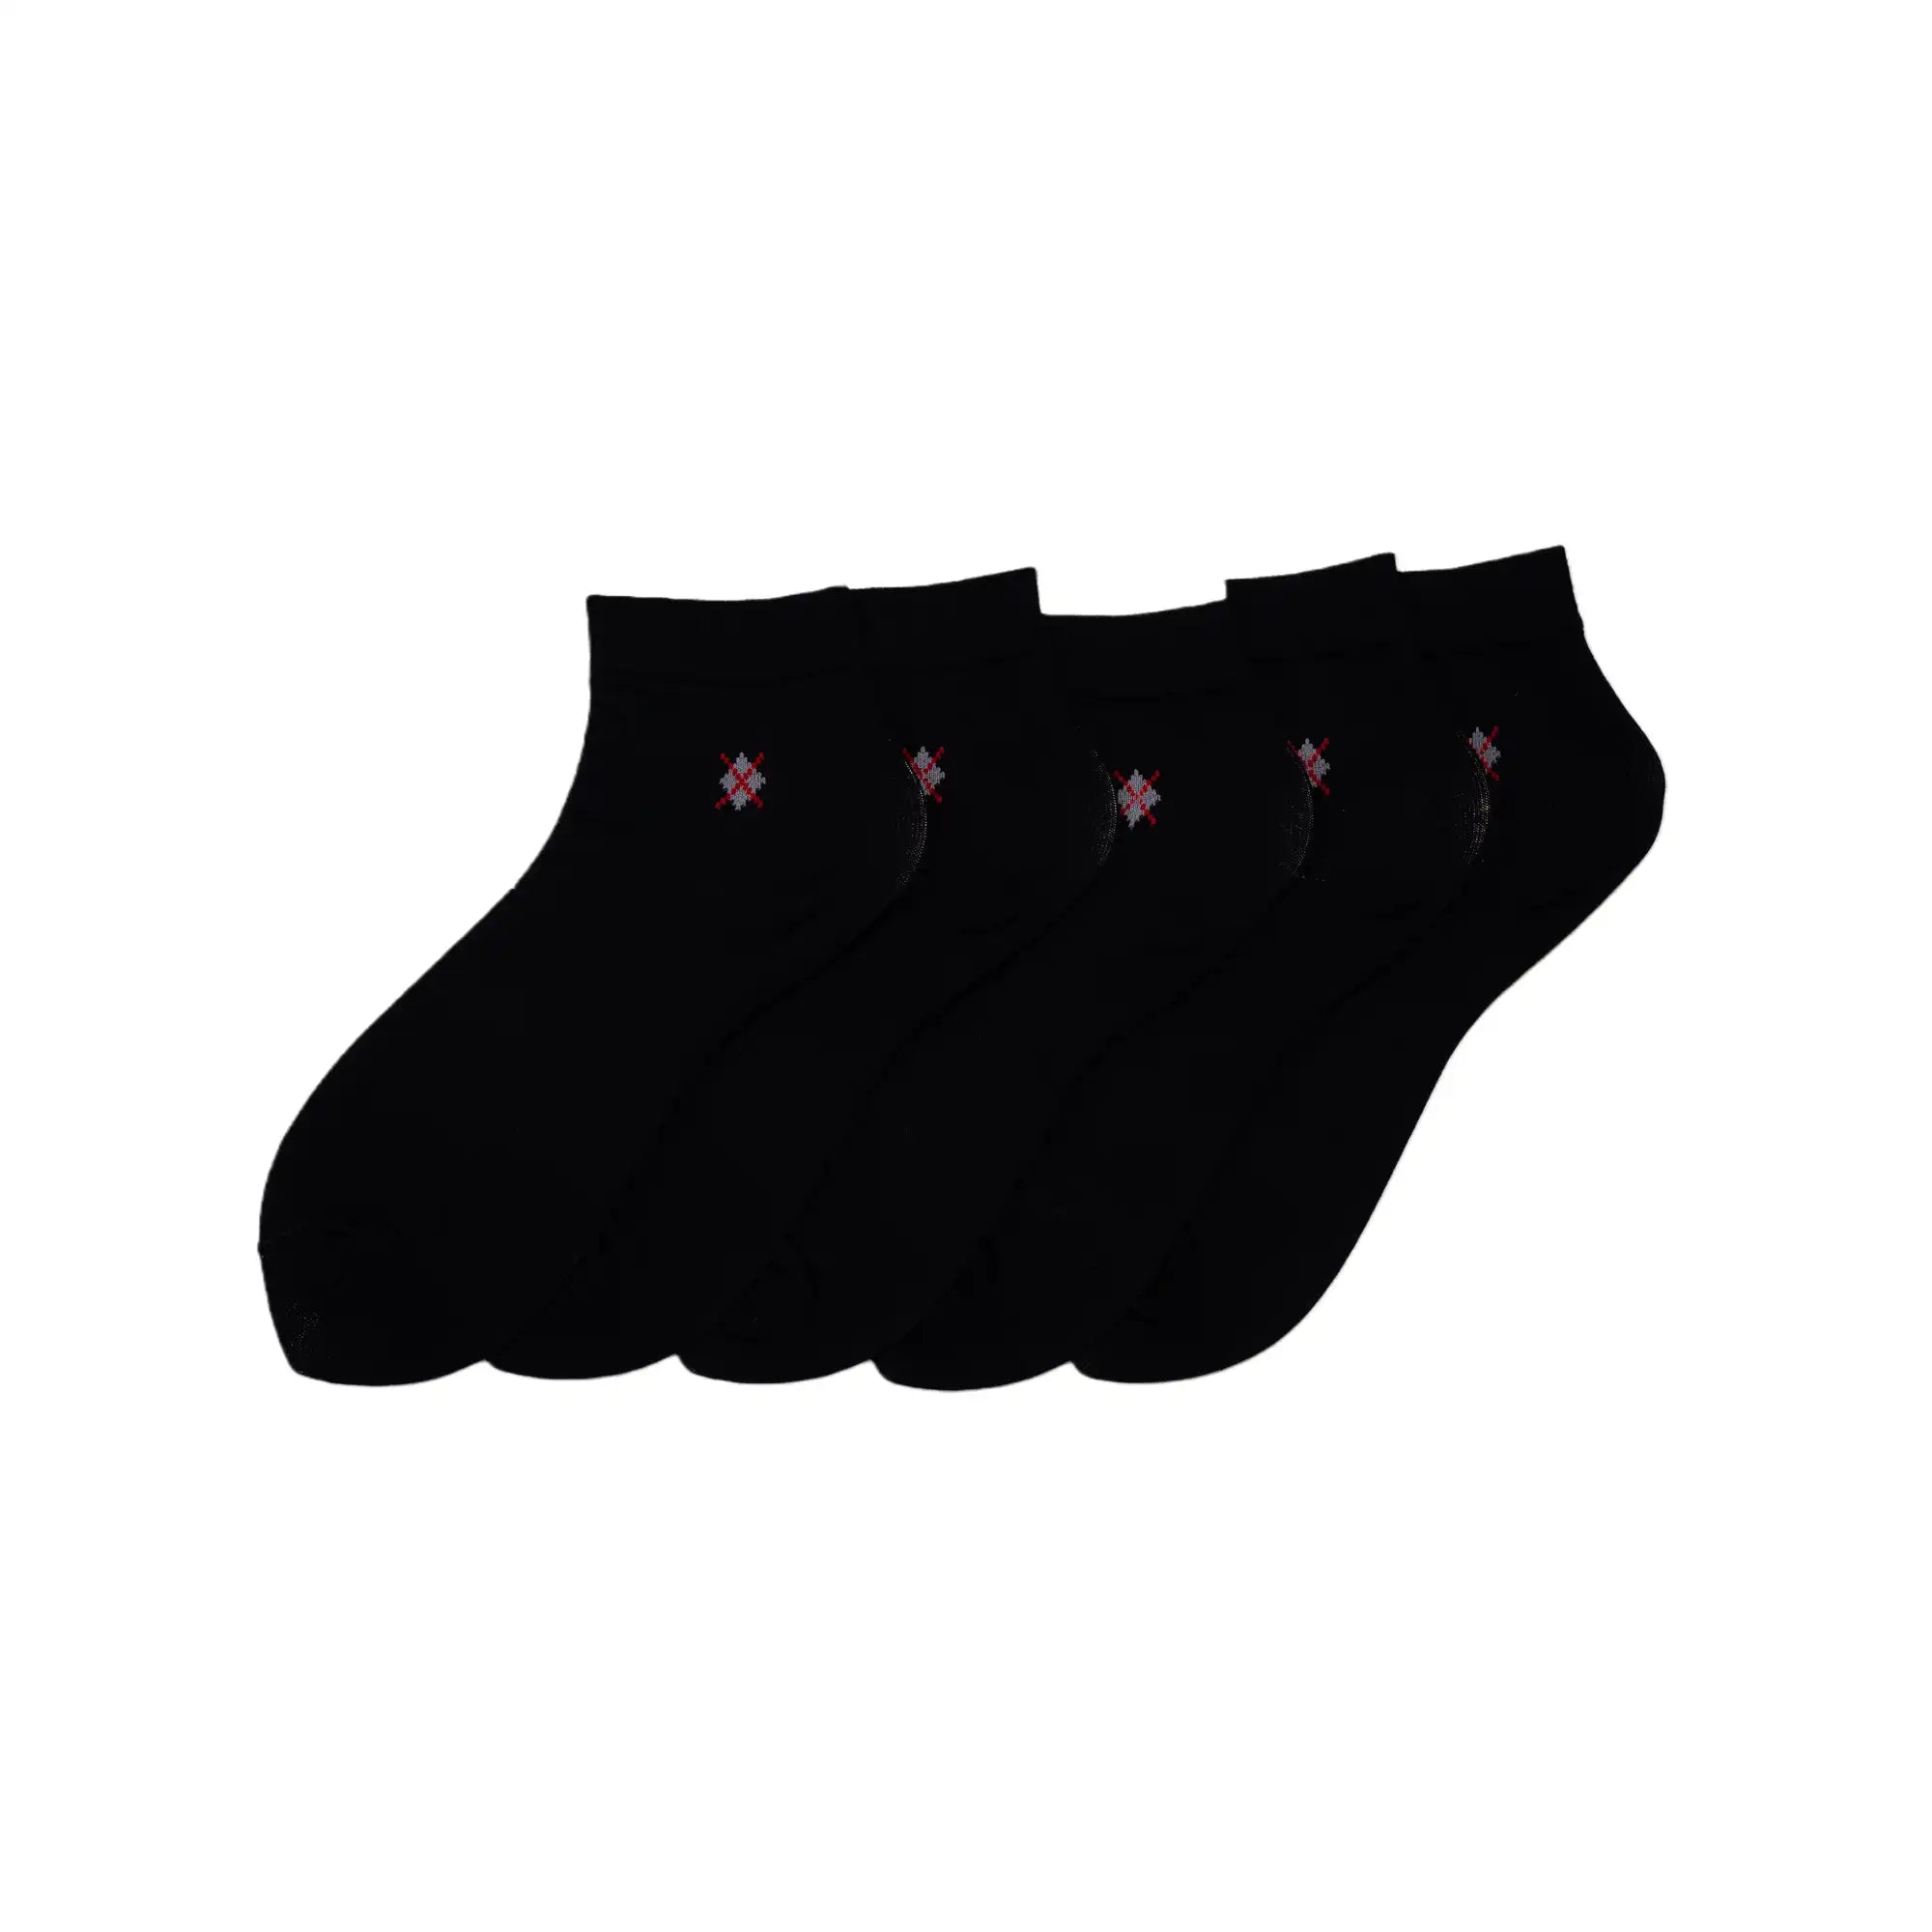 Young Wings Men's Black Colour Cotton Fabric Solid Ankle Length Socks - Pack of 5, Style no. 2200-M1